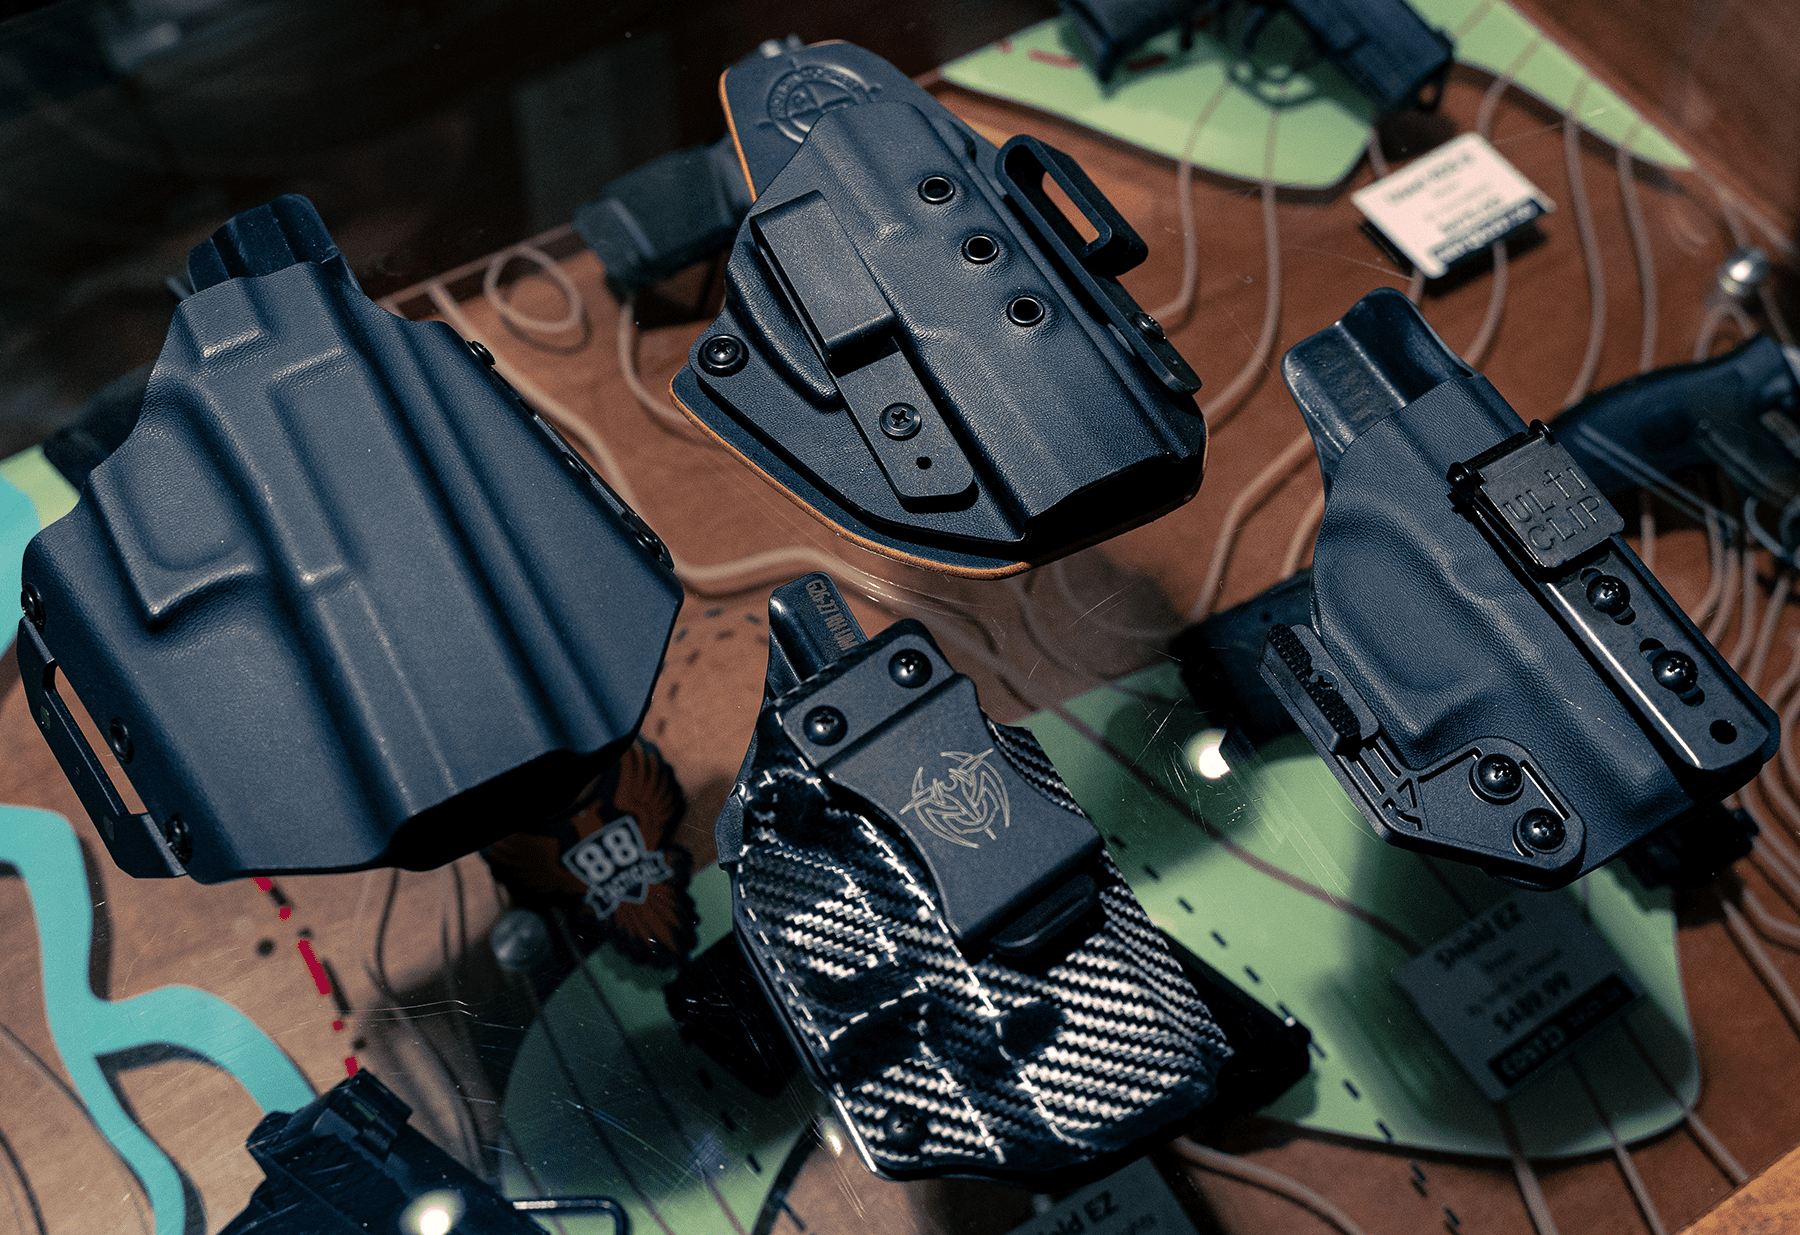 8 Factors to Consider when Choosing a Concealed Carry Holster